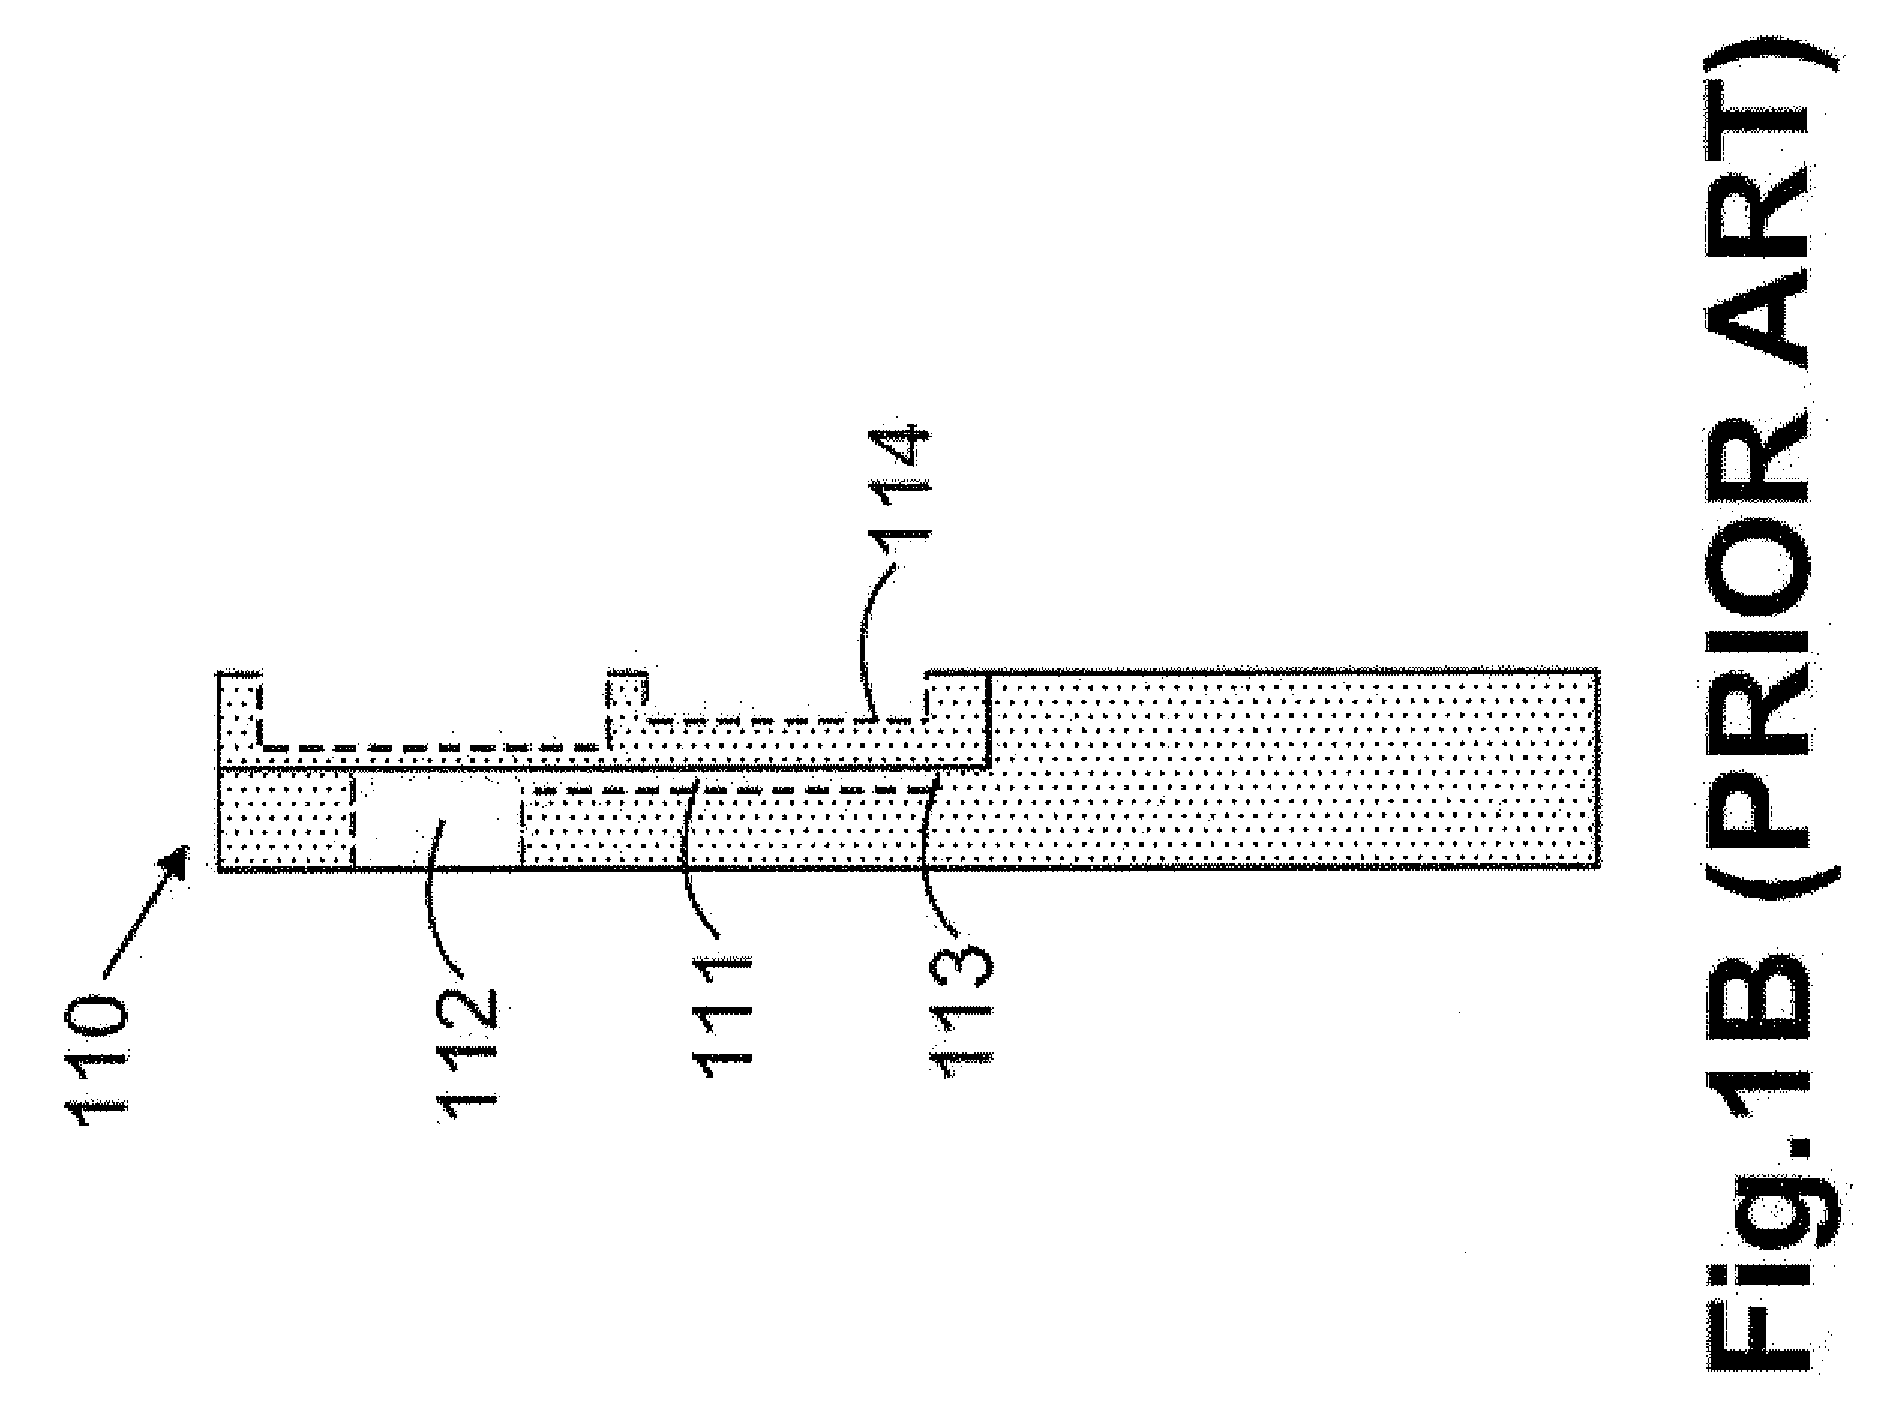 Trench mosfet with shielded electrode and avalanche enhancement region